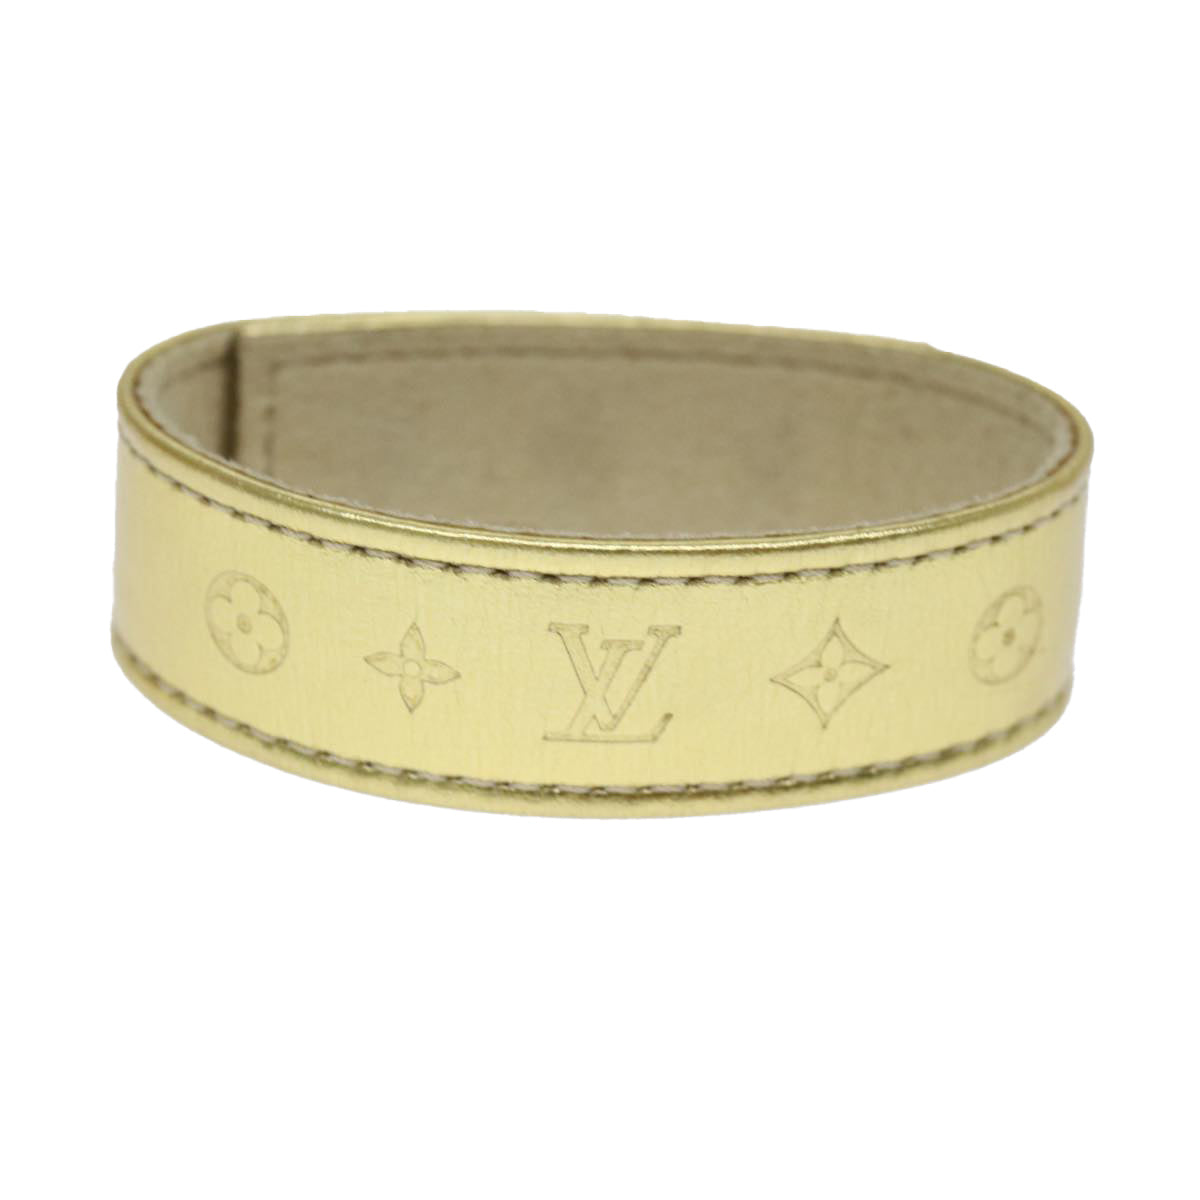 LOUIS VUITTON Suhari Bracelet Leather 2008 Hong Kong Only Gold All LV Auth 74006